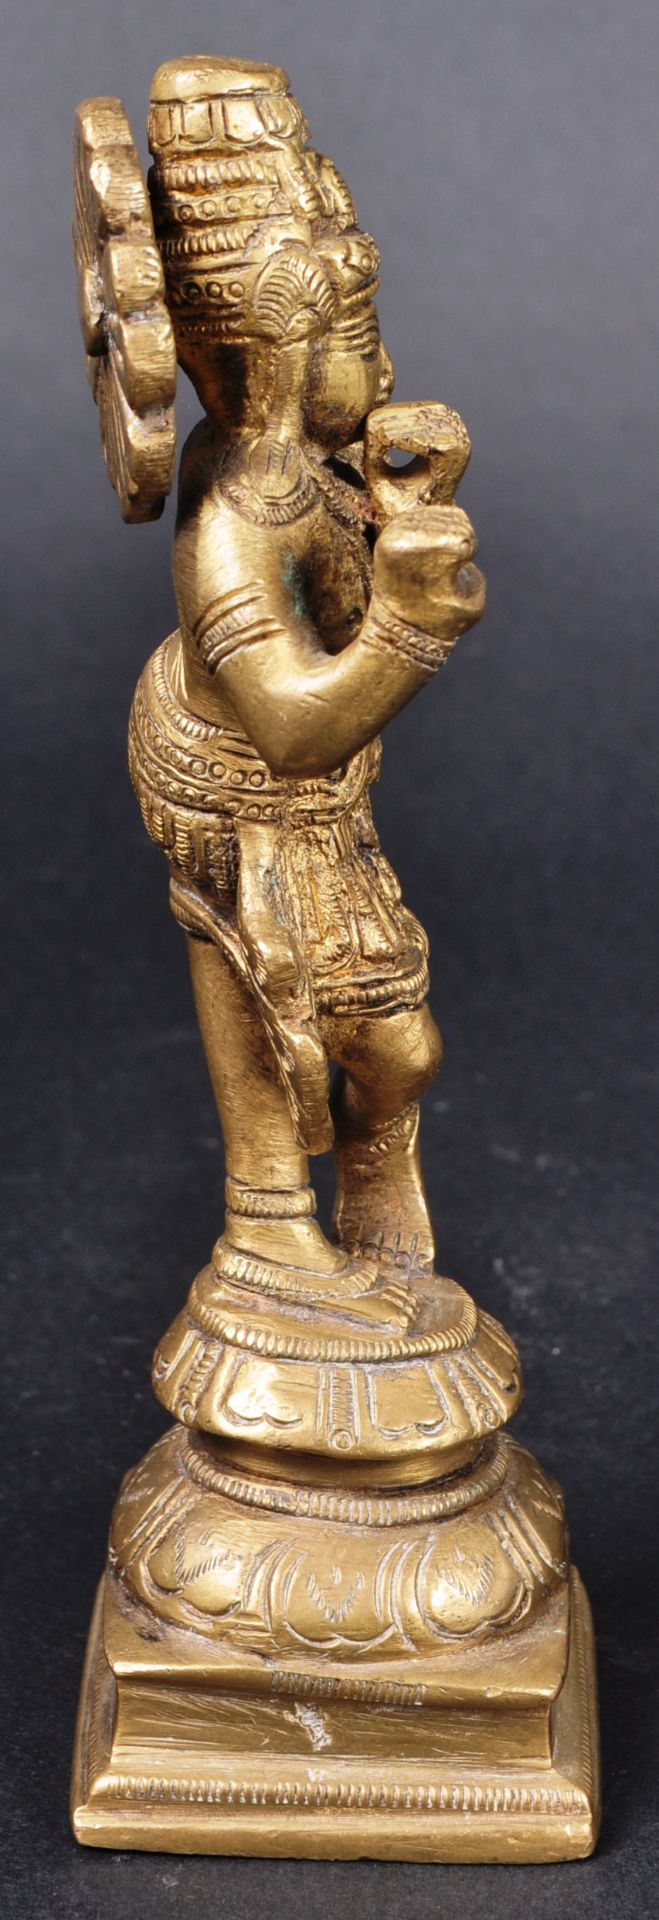 EARLY 20TH CENTURY BRONZE ORIENTAL MUSICIAN FIGURE - Image 7 of 7